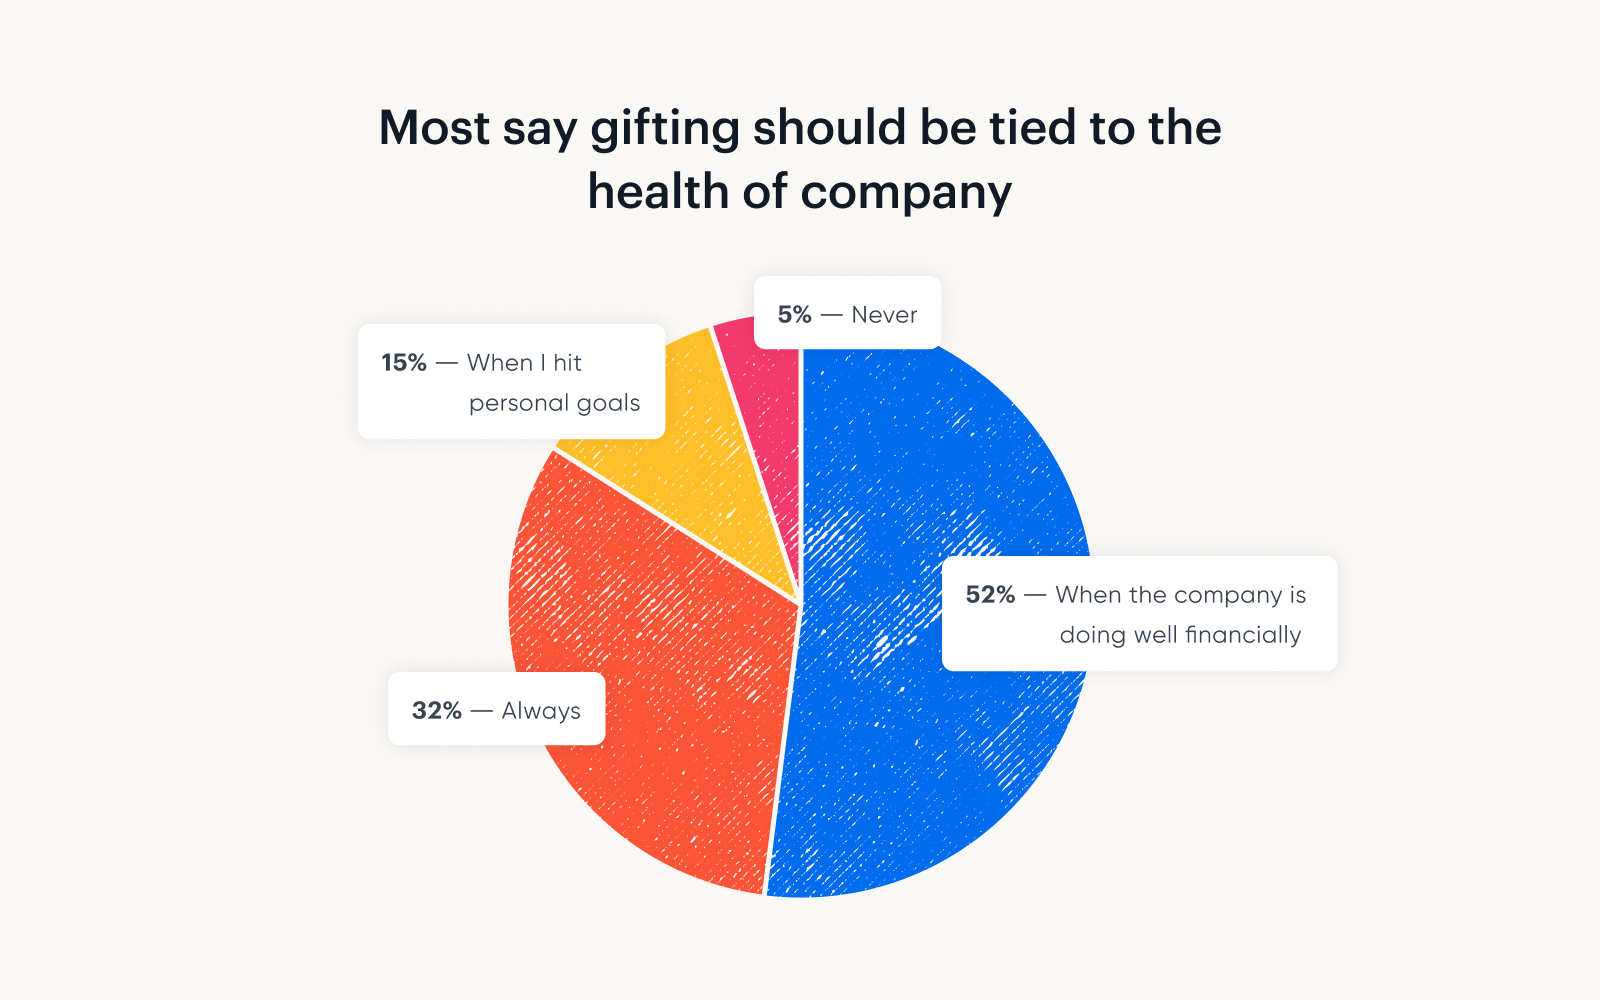 A graph showing that most employees believe gifting should be tied to the health of the company.